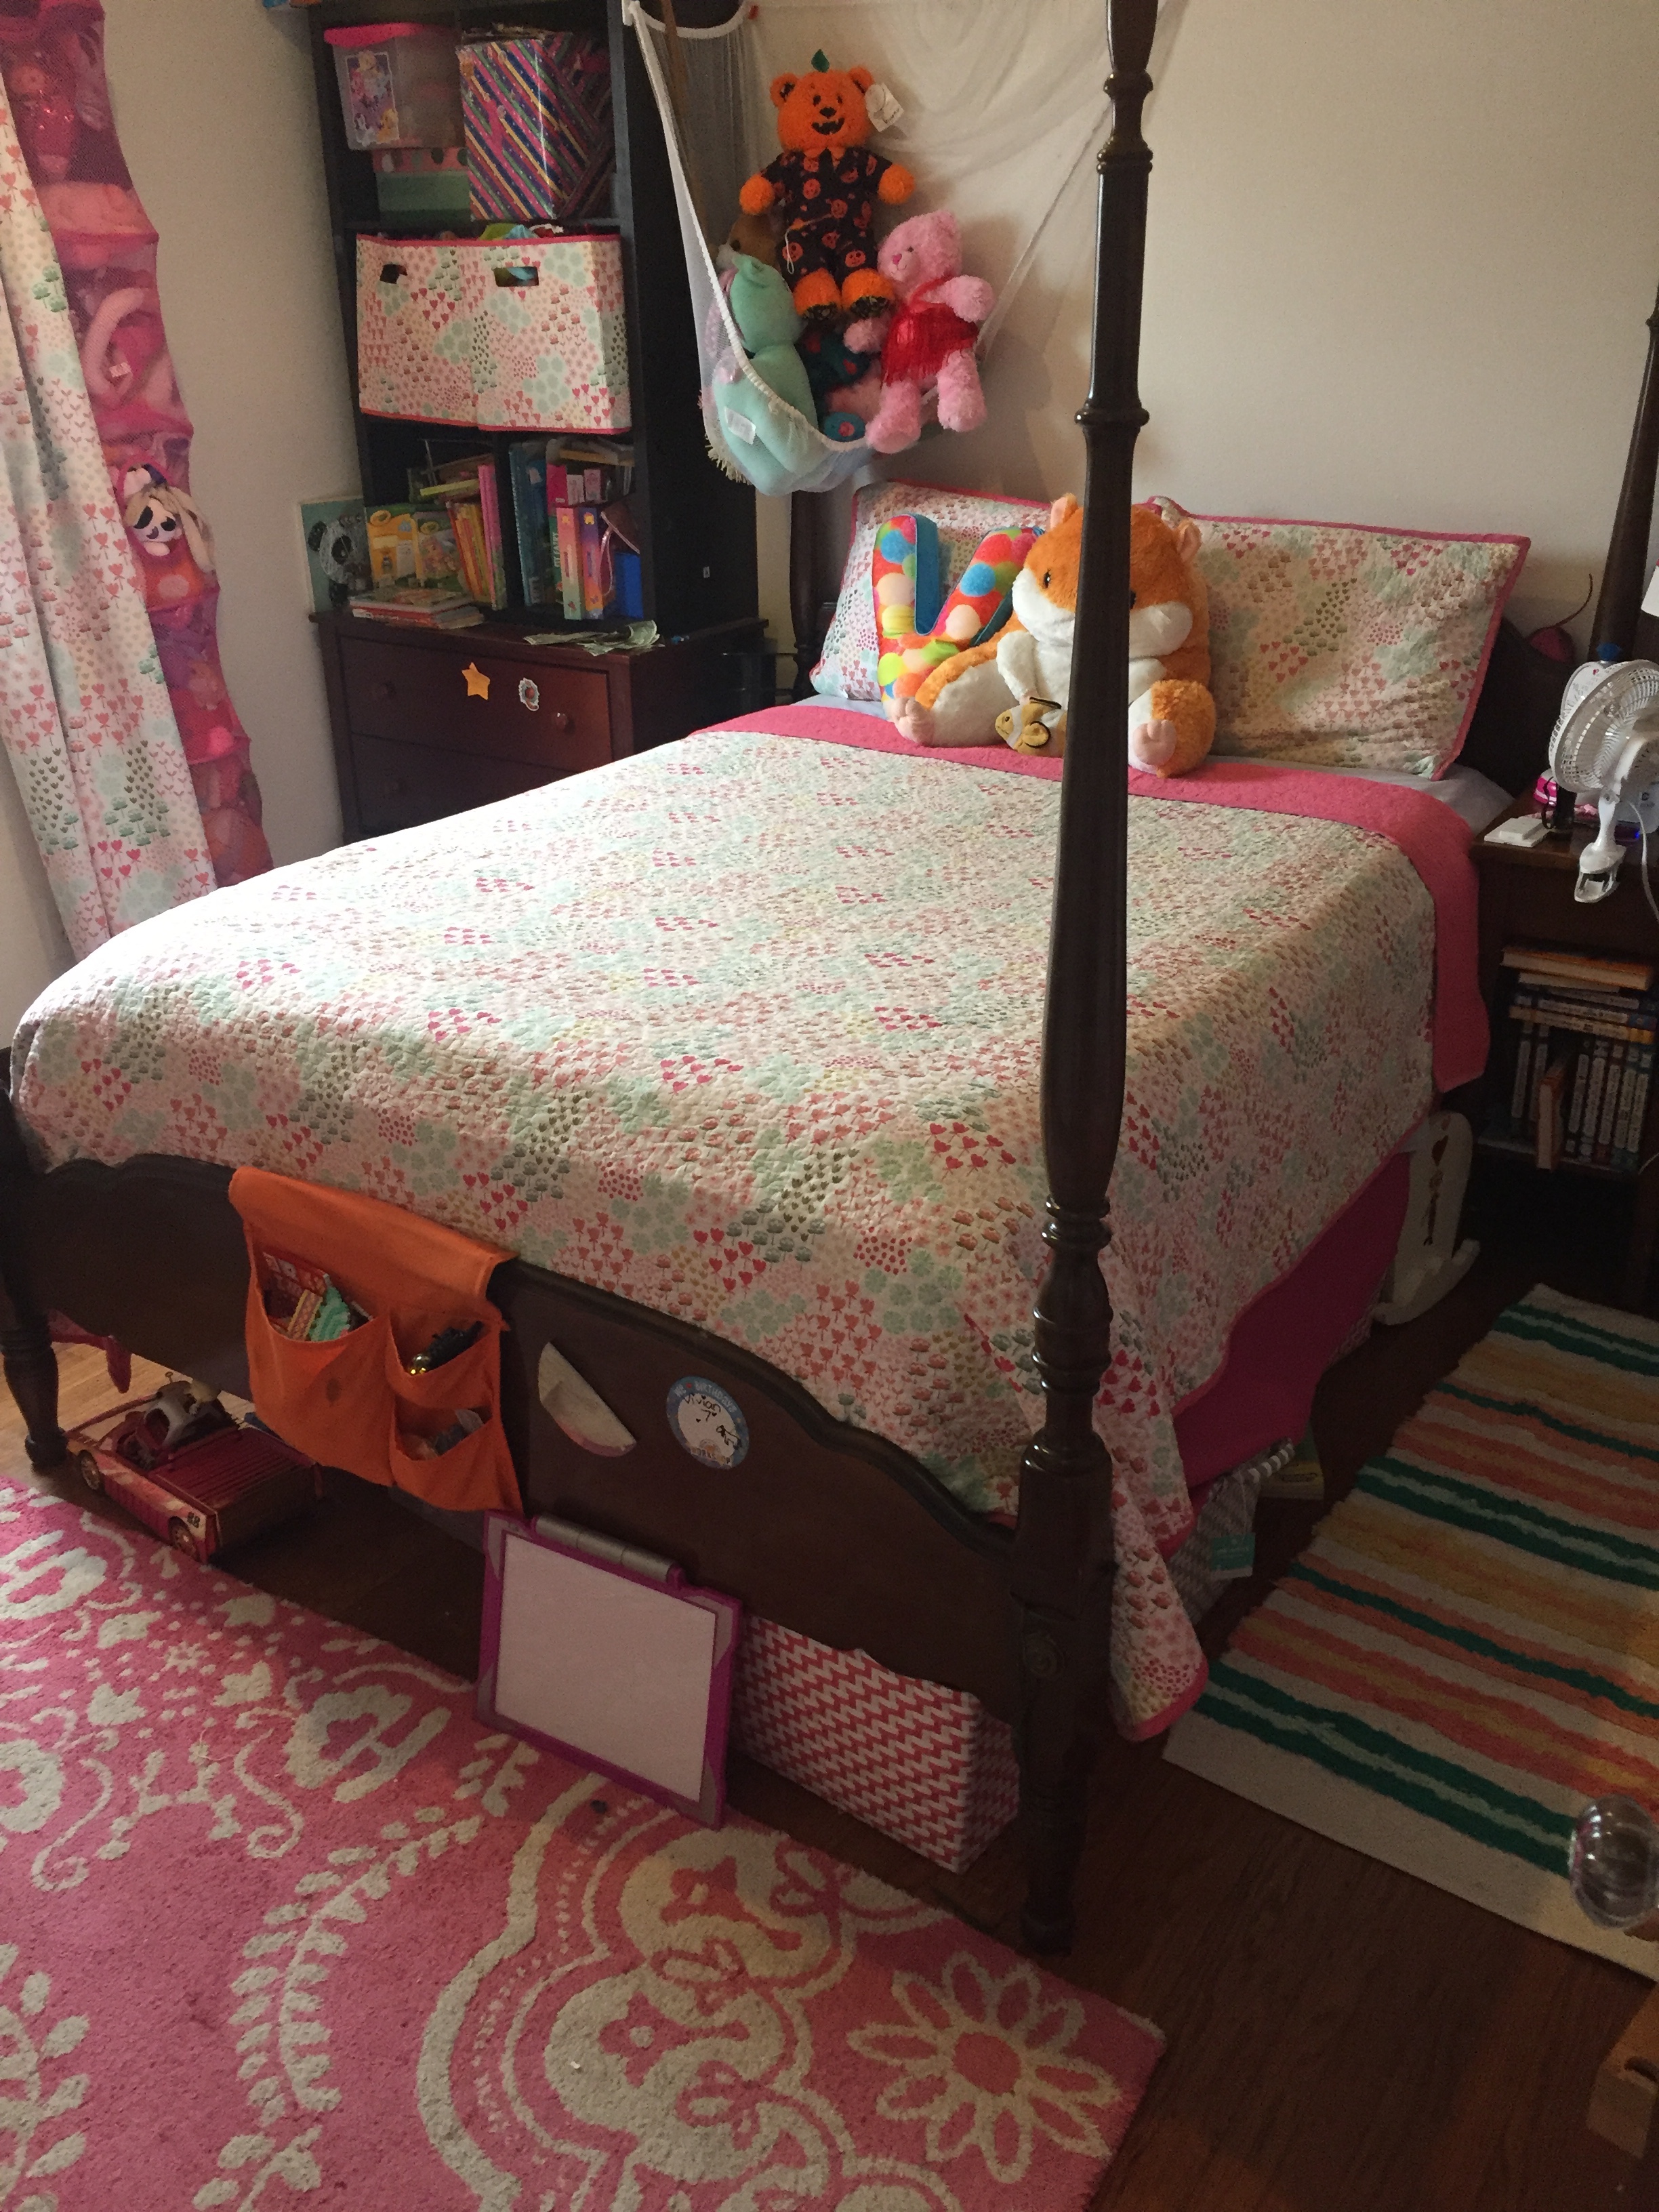 Kids bedroom decor with Pillowfort bedding , rugs, and storage bins underneath